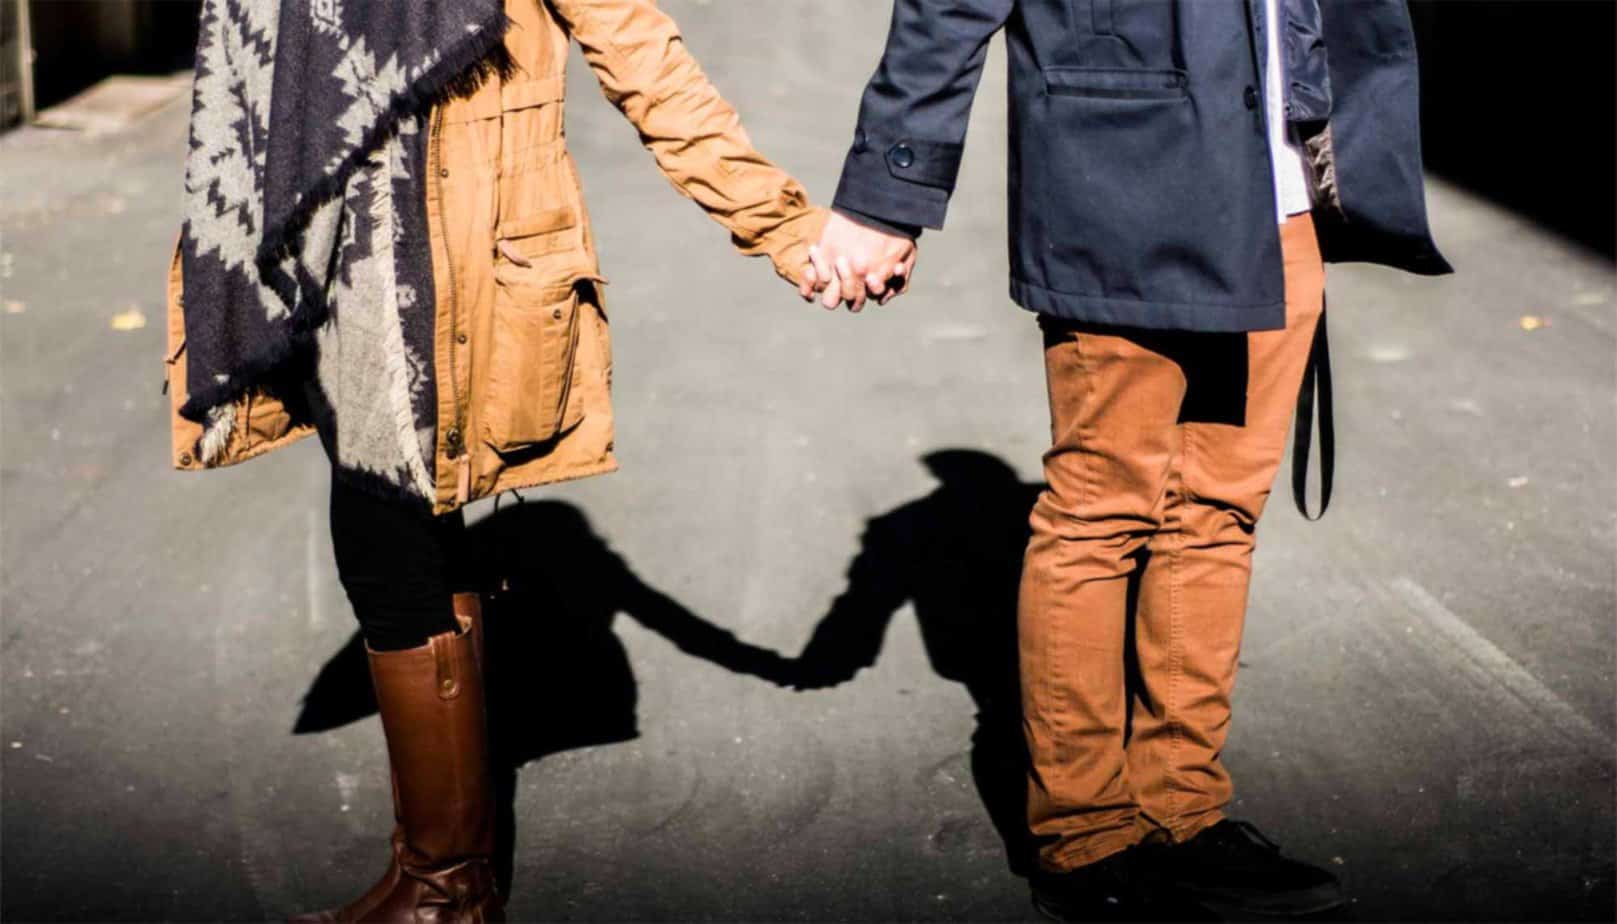 Love and Recovery: What You Should Know When Looking for a Relationship